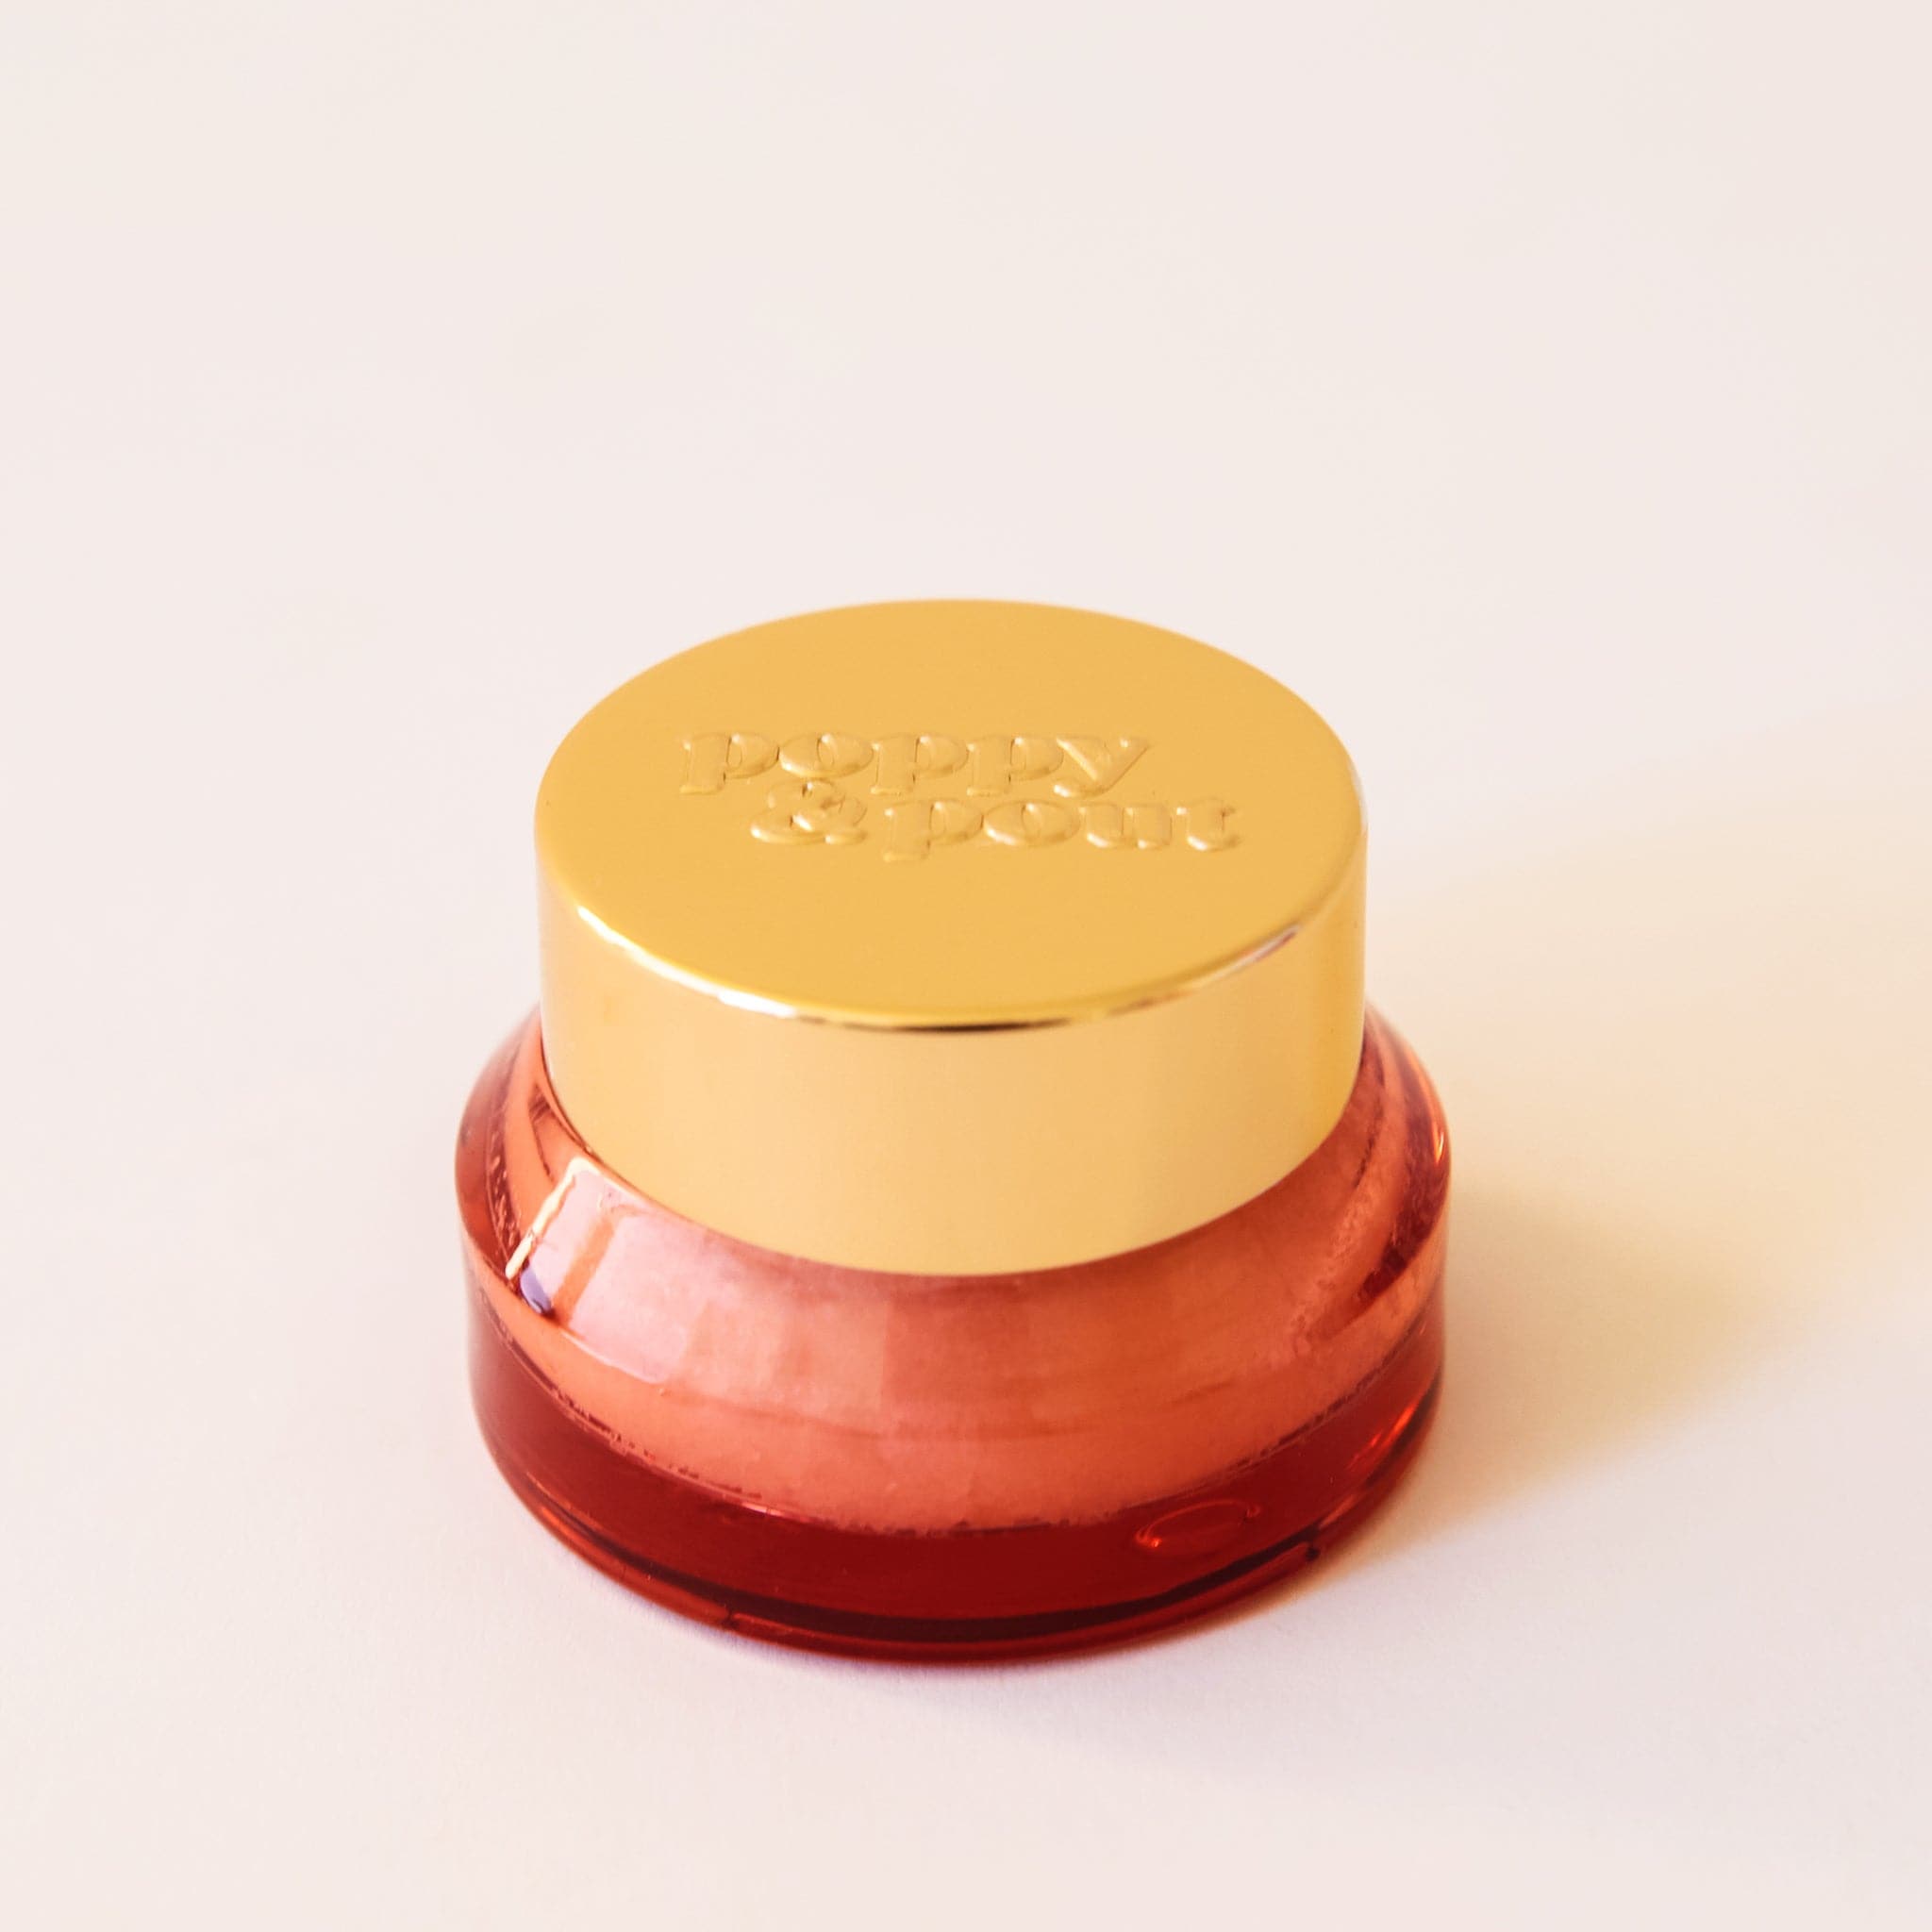 Lip scrub in an orange red container with a gold lid. This lip scrub is grainy, hydrating and perfect for your lips.